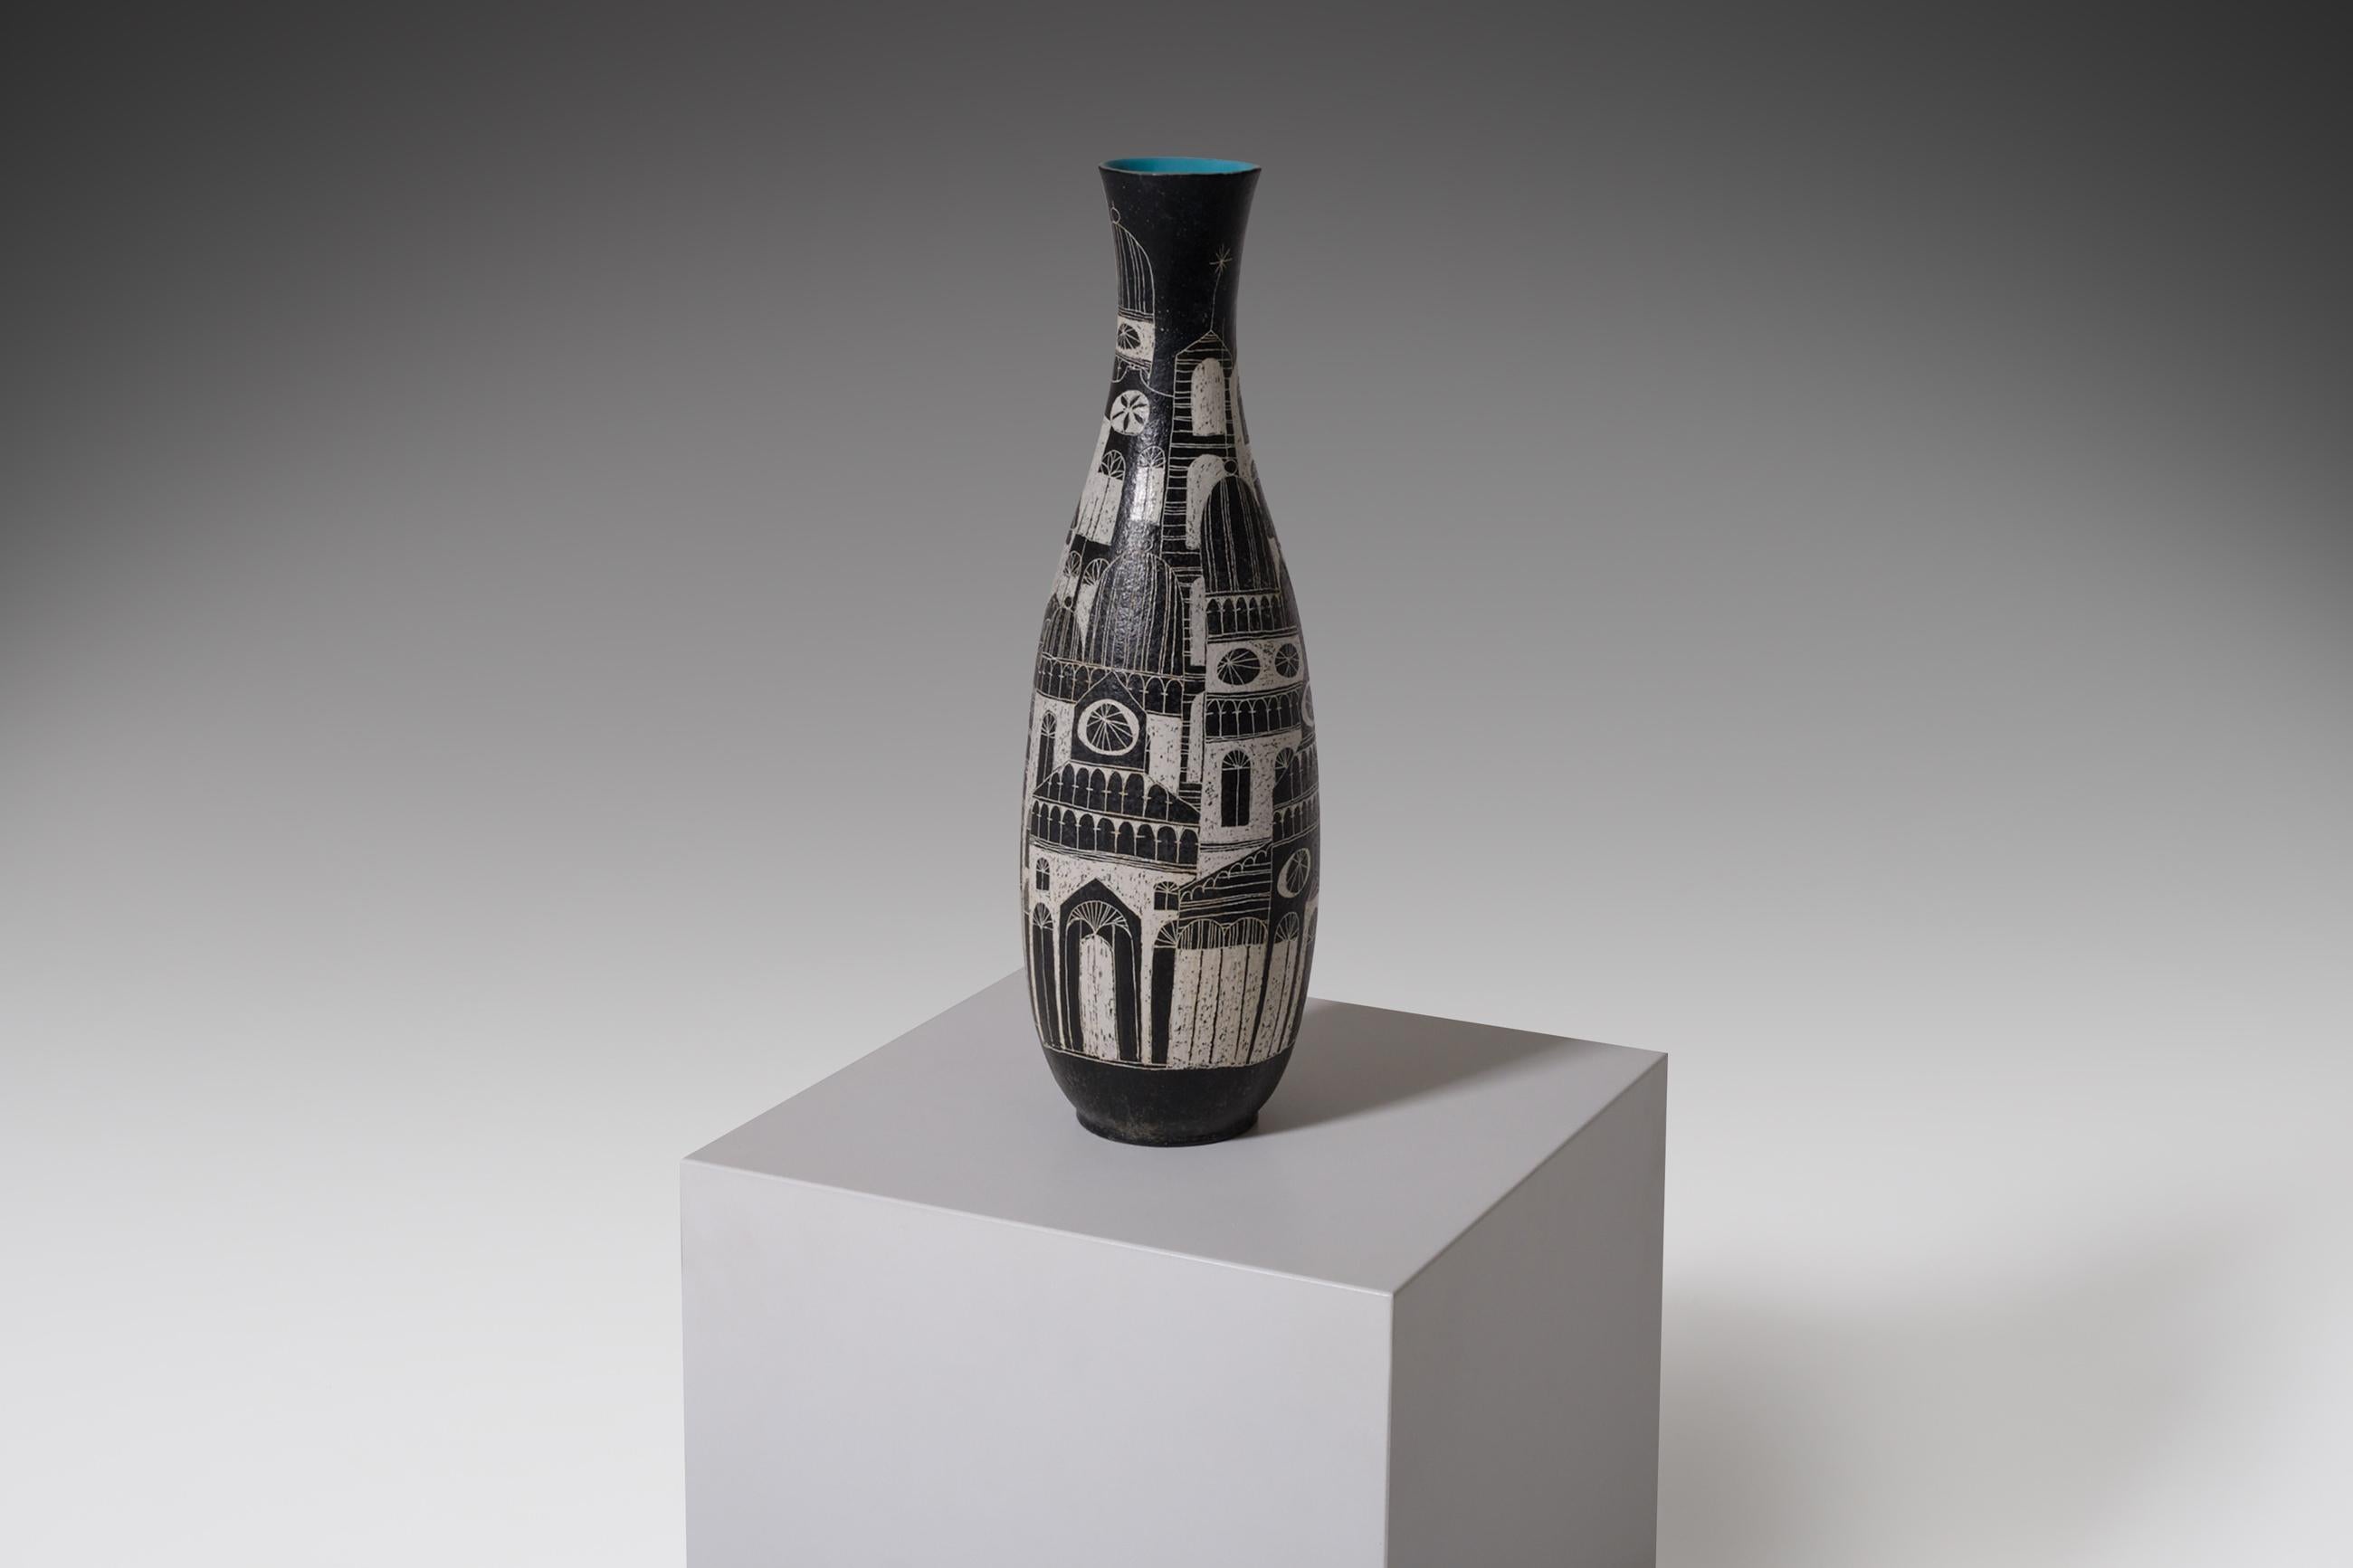 Large decorative ceramic vase by master ceramist Marcello Fantoni, Italy, 1950s. The vase shows a drawing of several women on one side and a variation of buildings on the other. A very nice and decorative scene done in black and white. The inside is